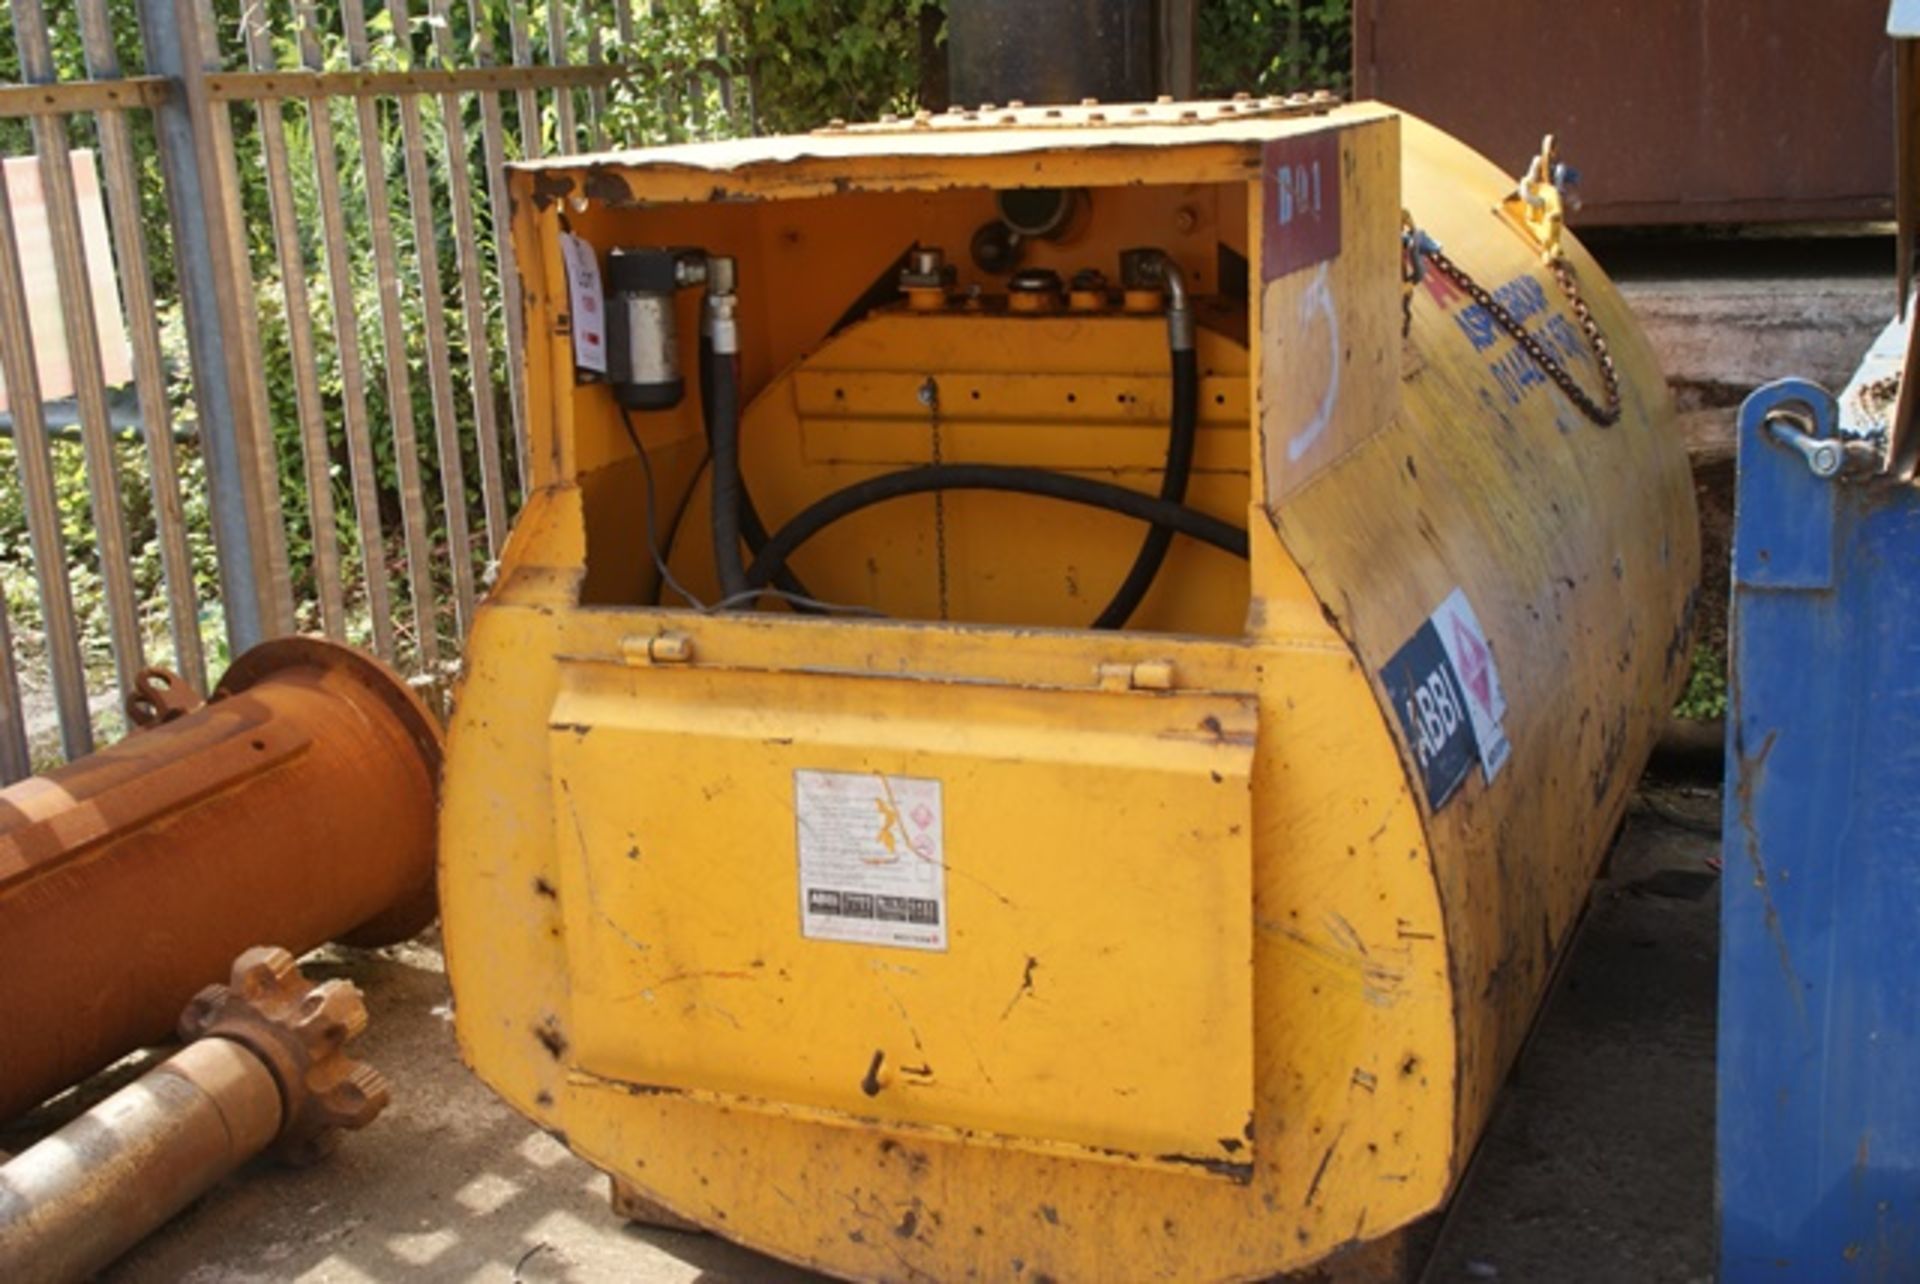 Western bunded fuel tank approx 2500 litre c/w pump. *NB: A work Method Statement and Risk